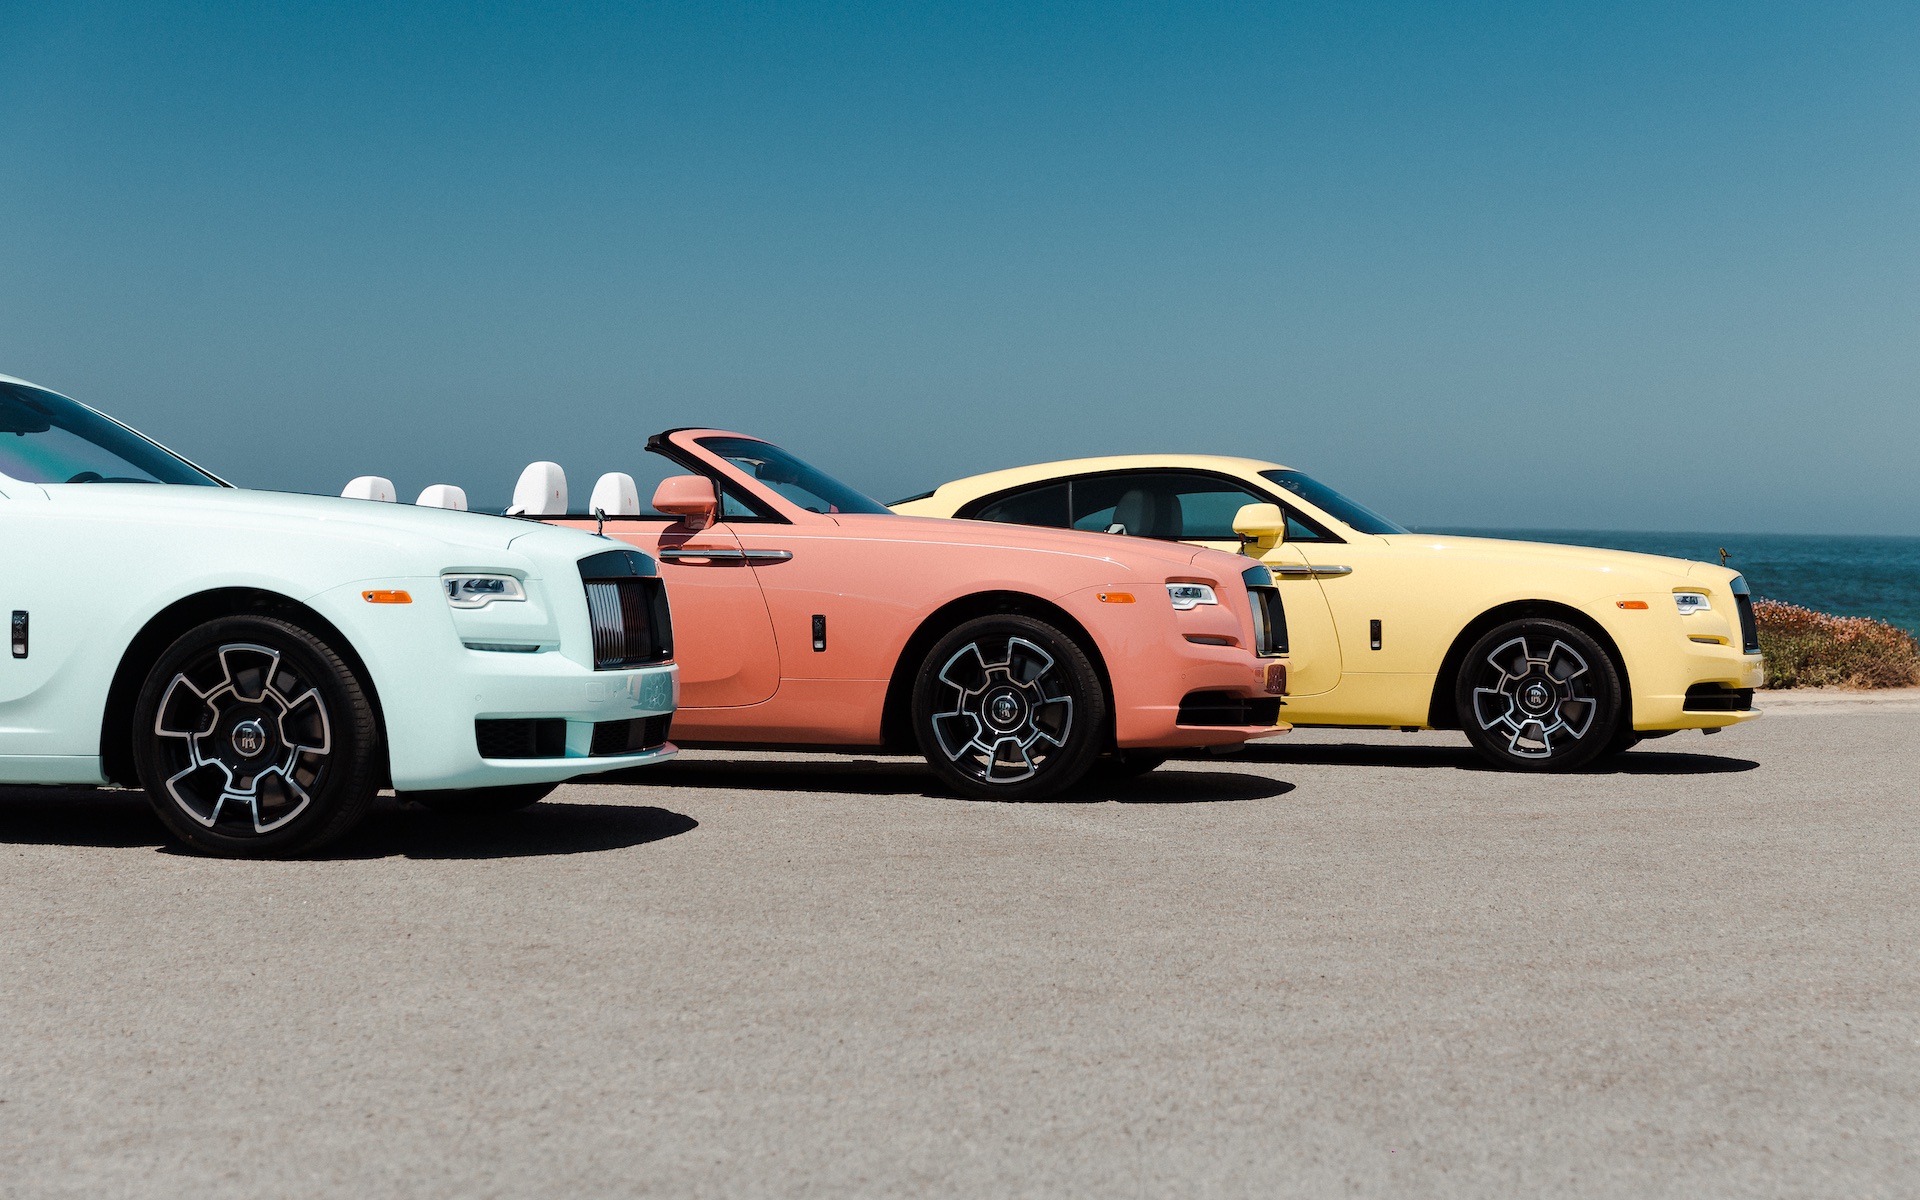 Rolls-Royce Brings A World Of Color To Monterey Car Week